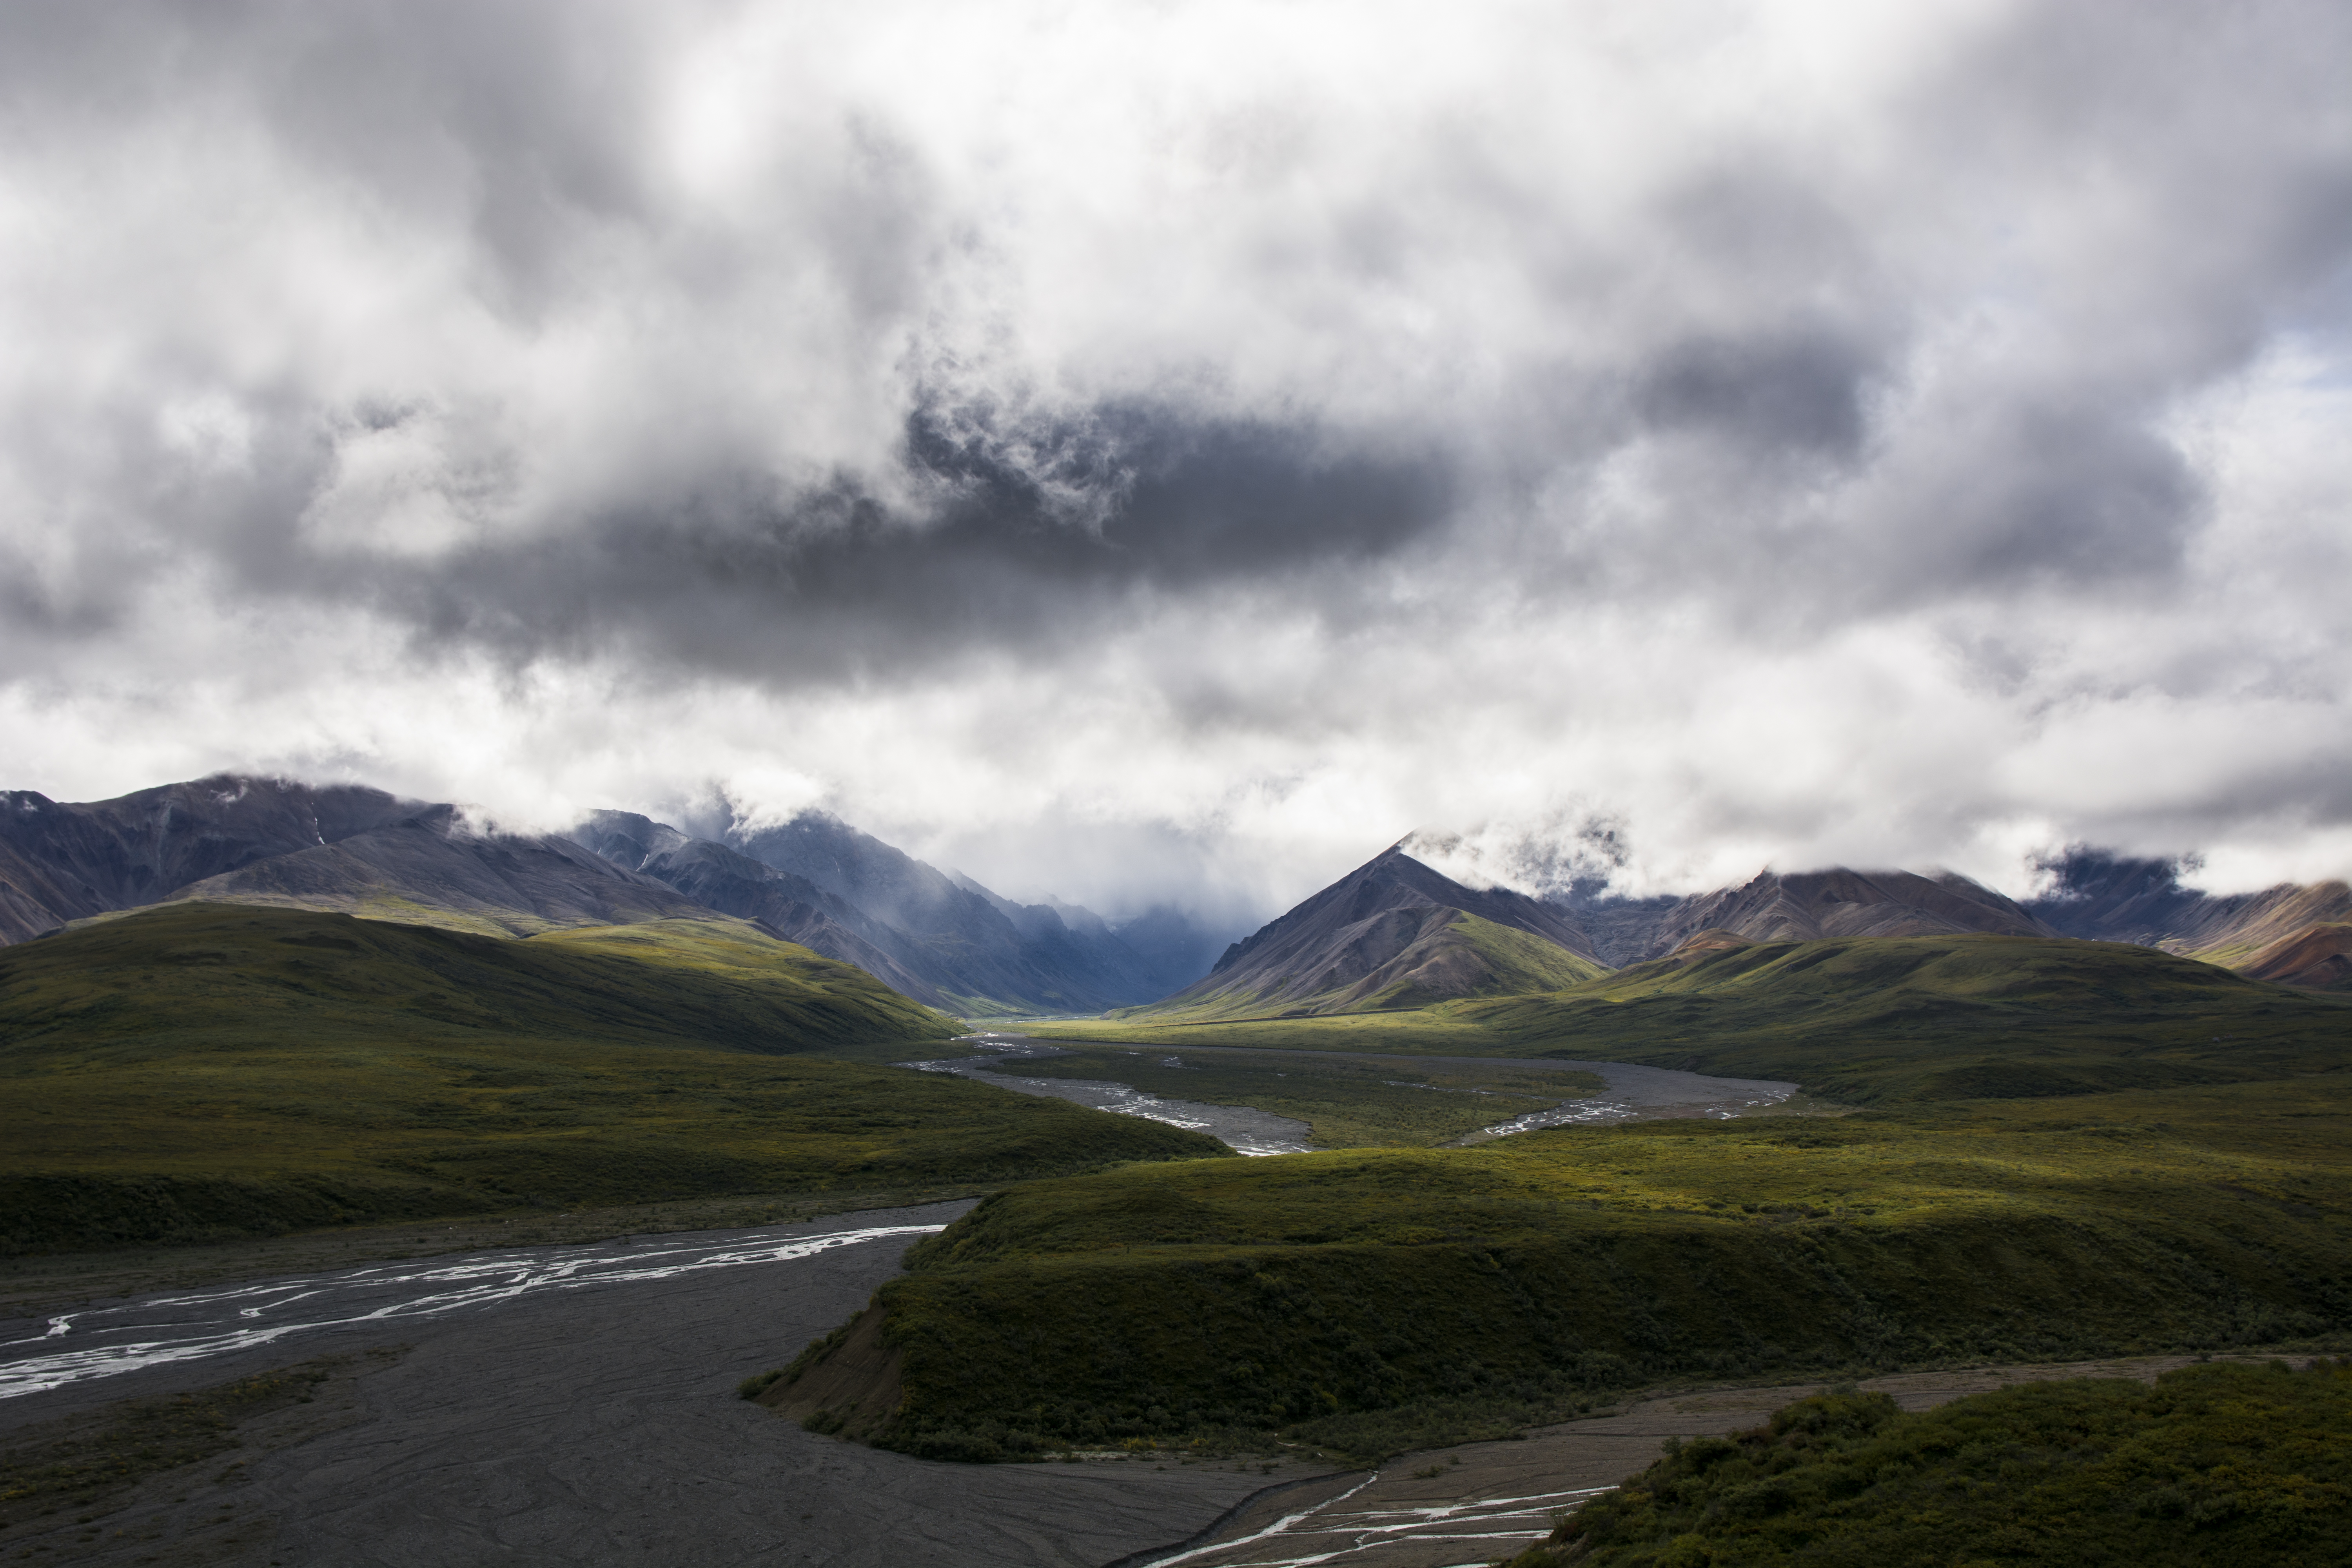 River valleys and green tundra lead up into rocky mountains. The tops of the mountains are shrouded in gray clouds.